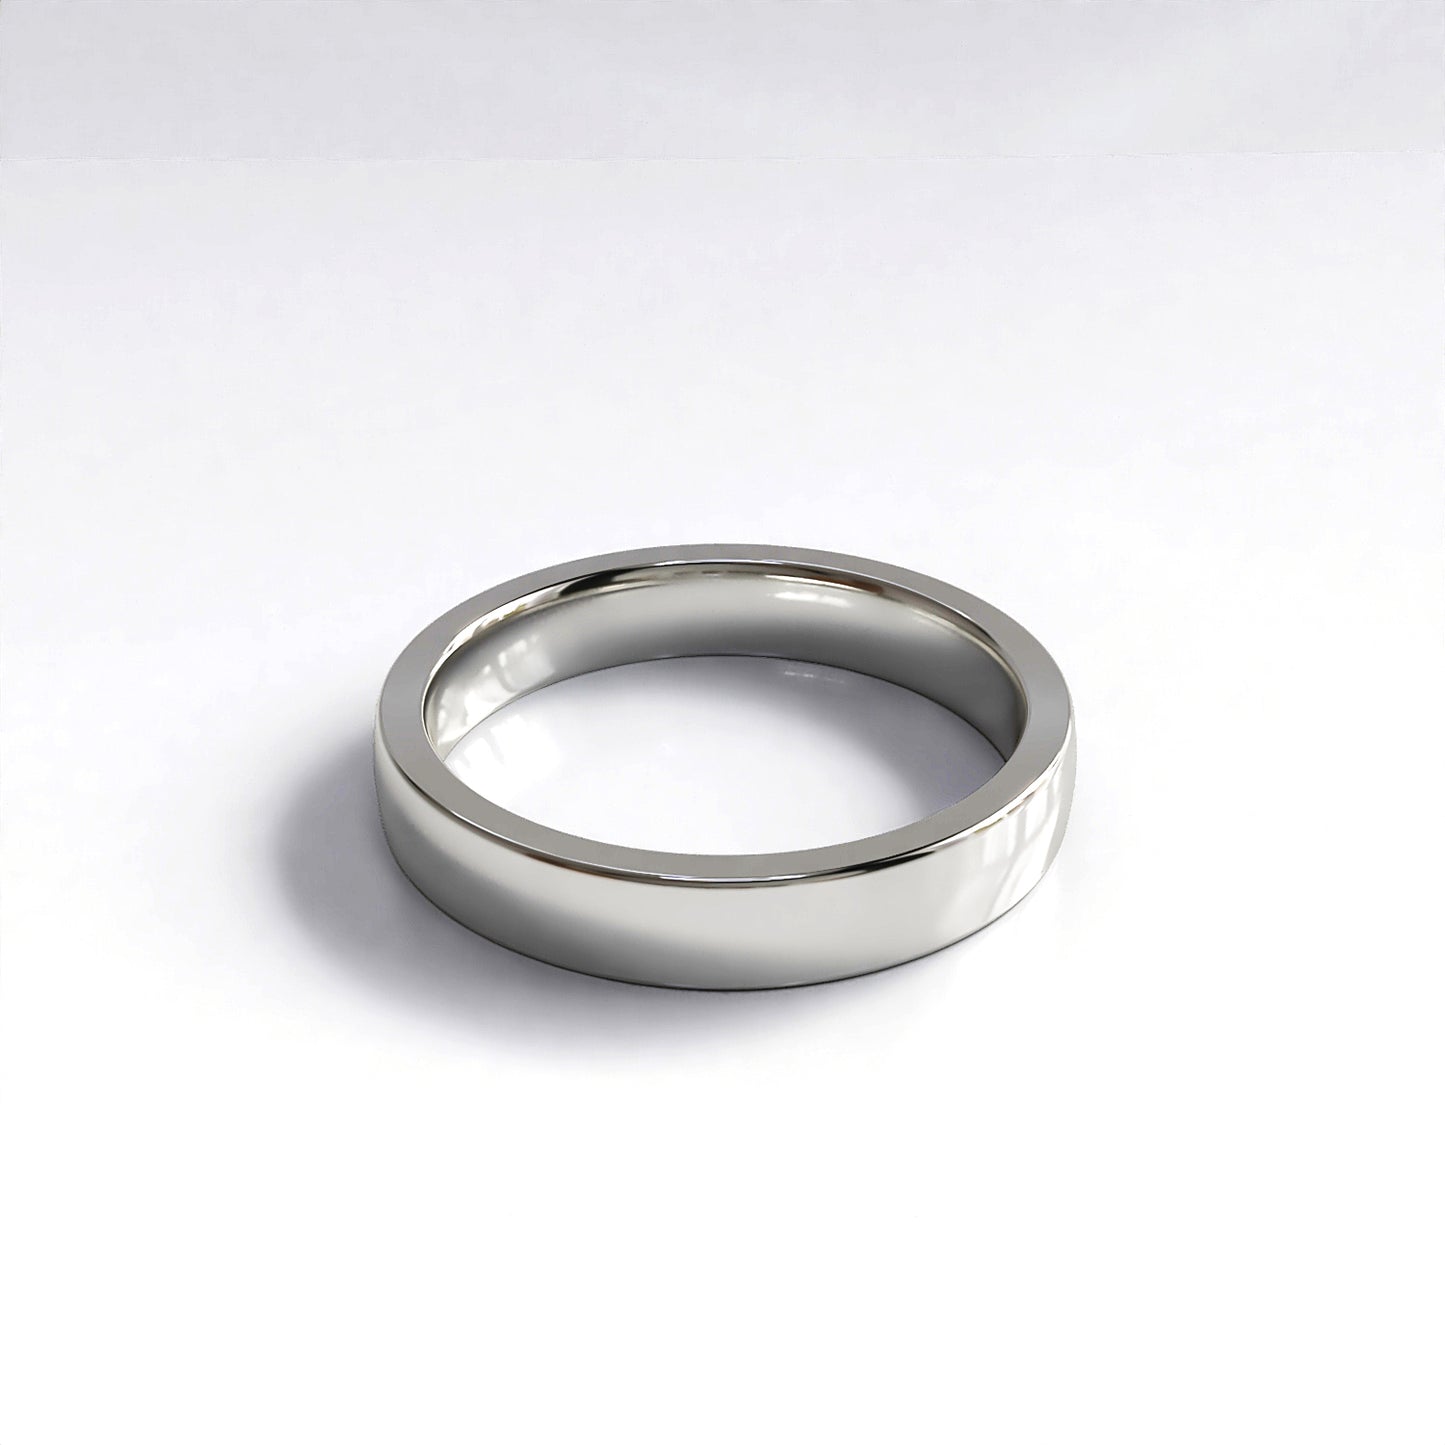 Catherine: Bespoke 9ct White Gold Fitted Wedding Band.